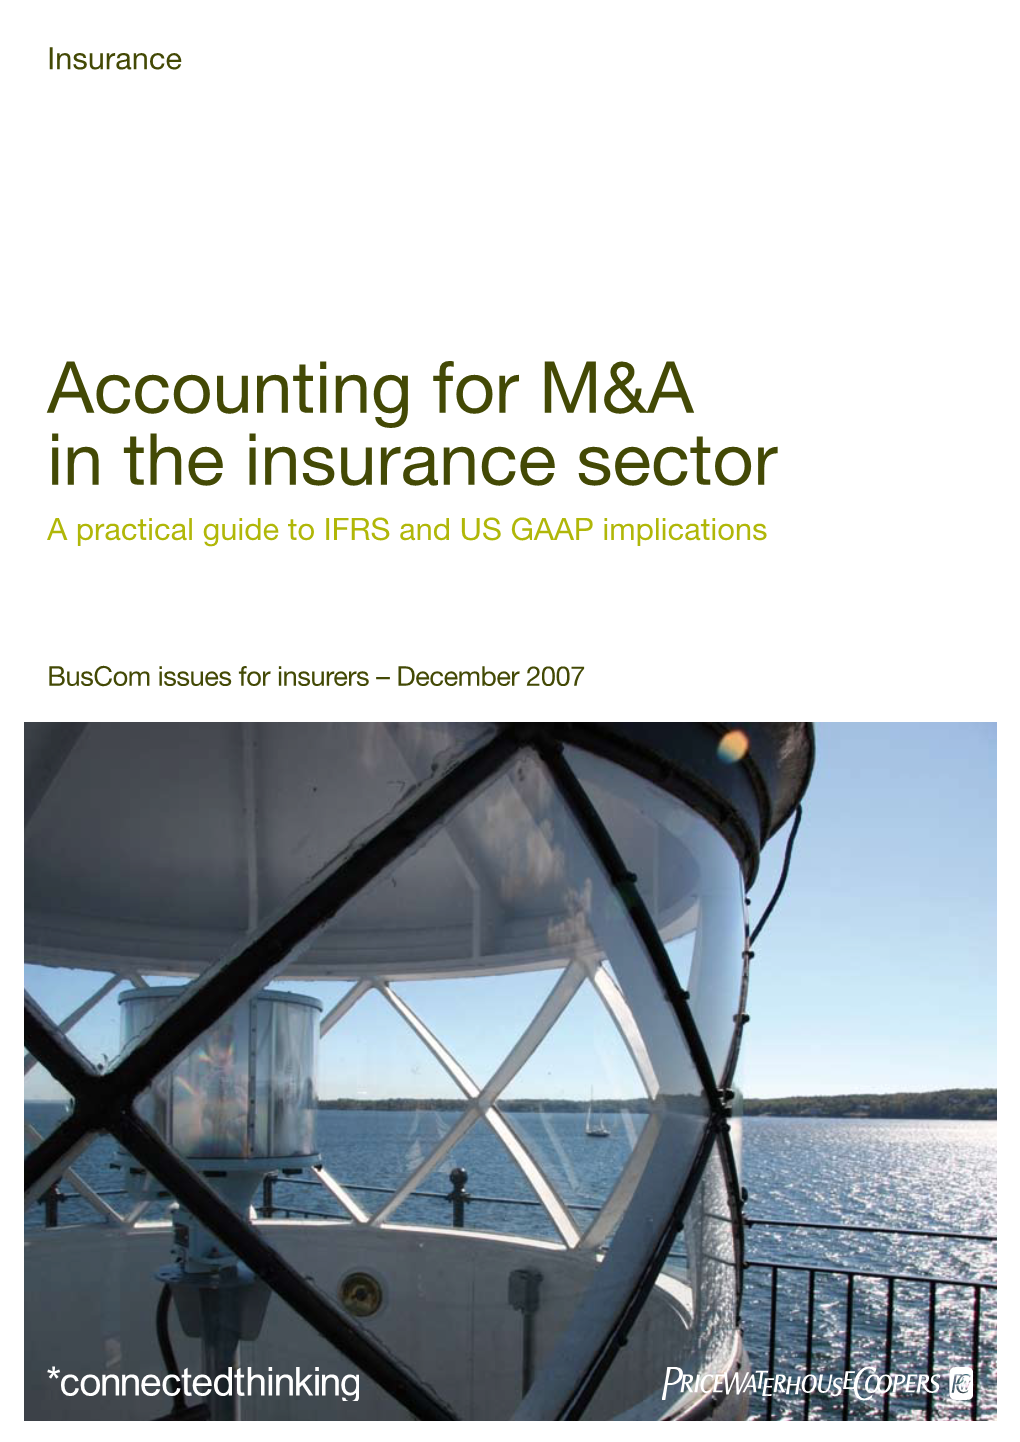 Accounting for M&A in the Insurance Sector